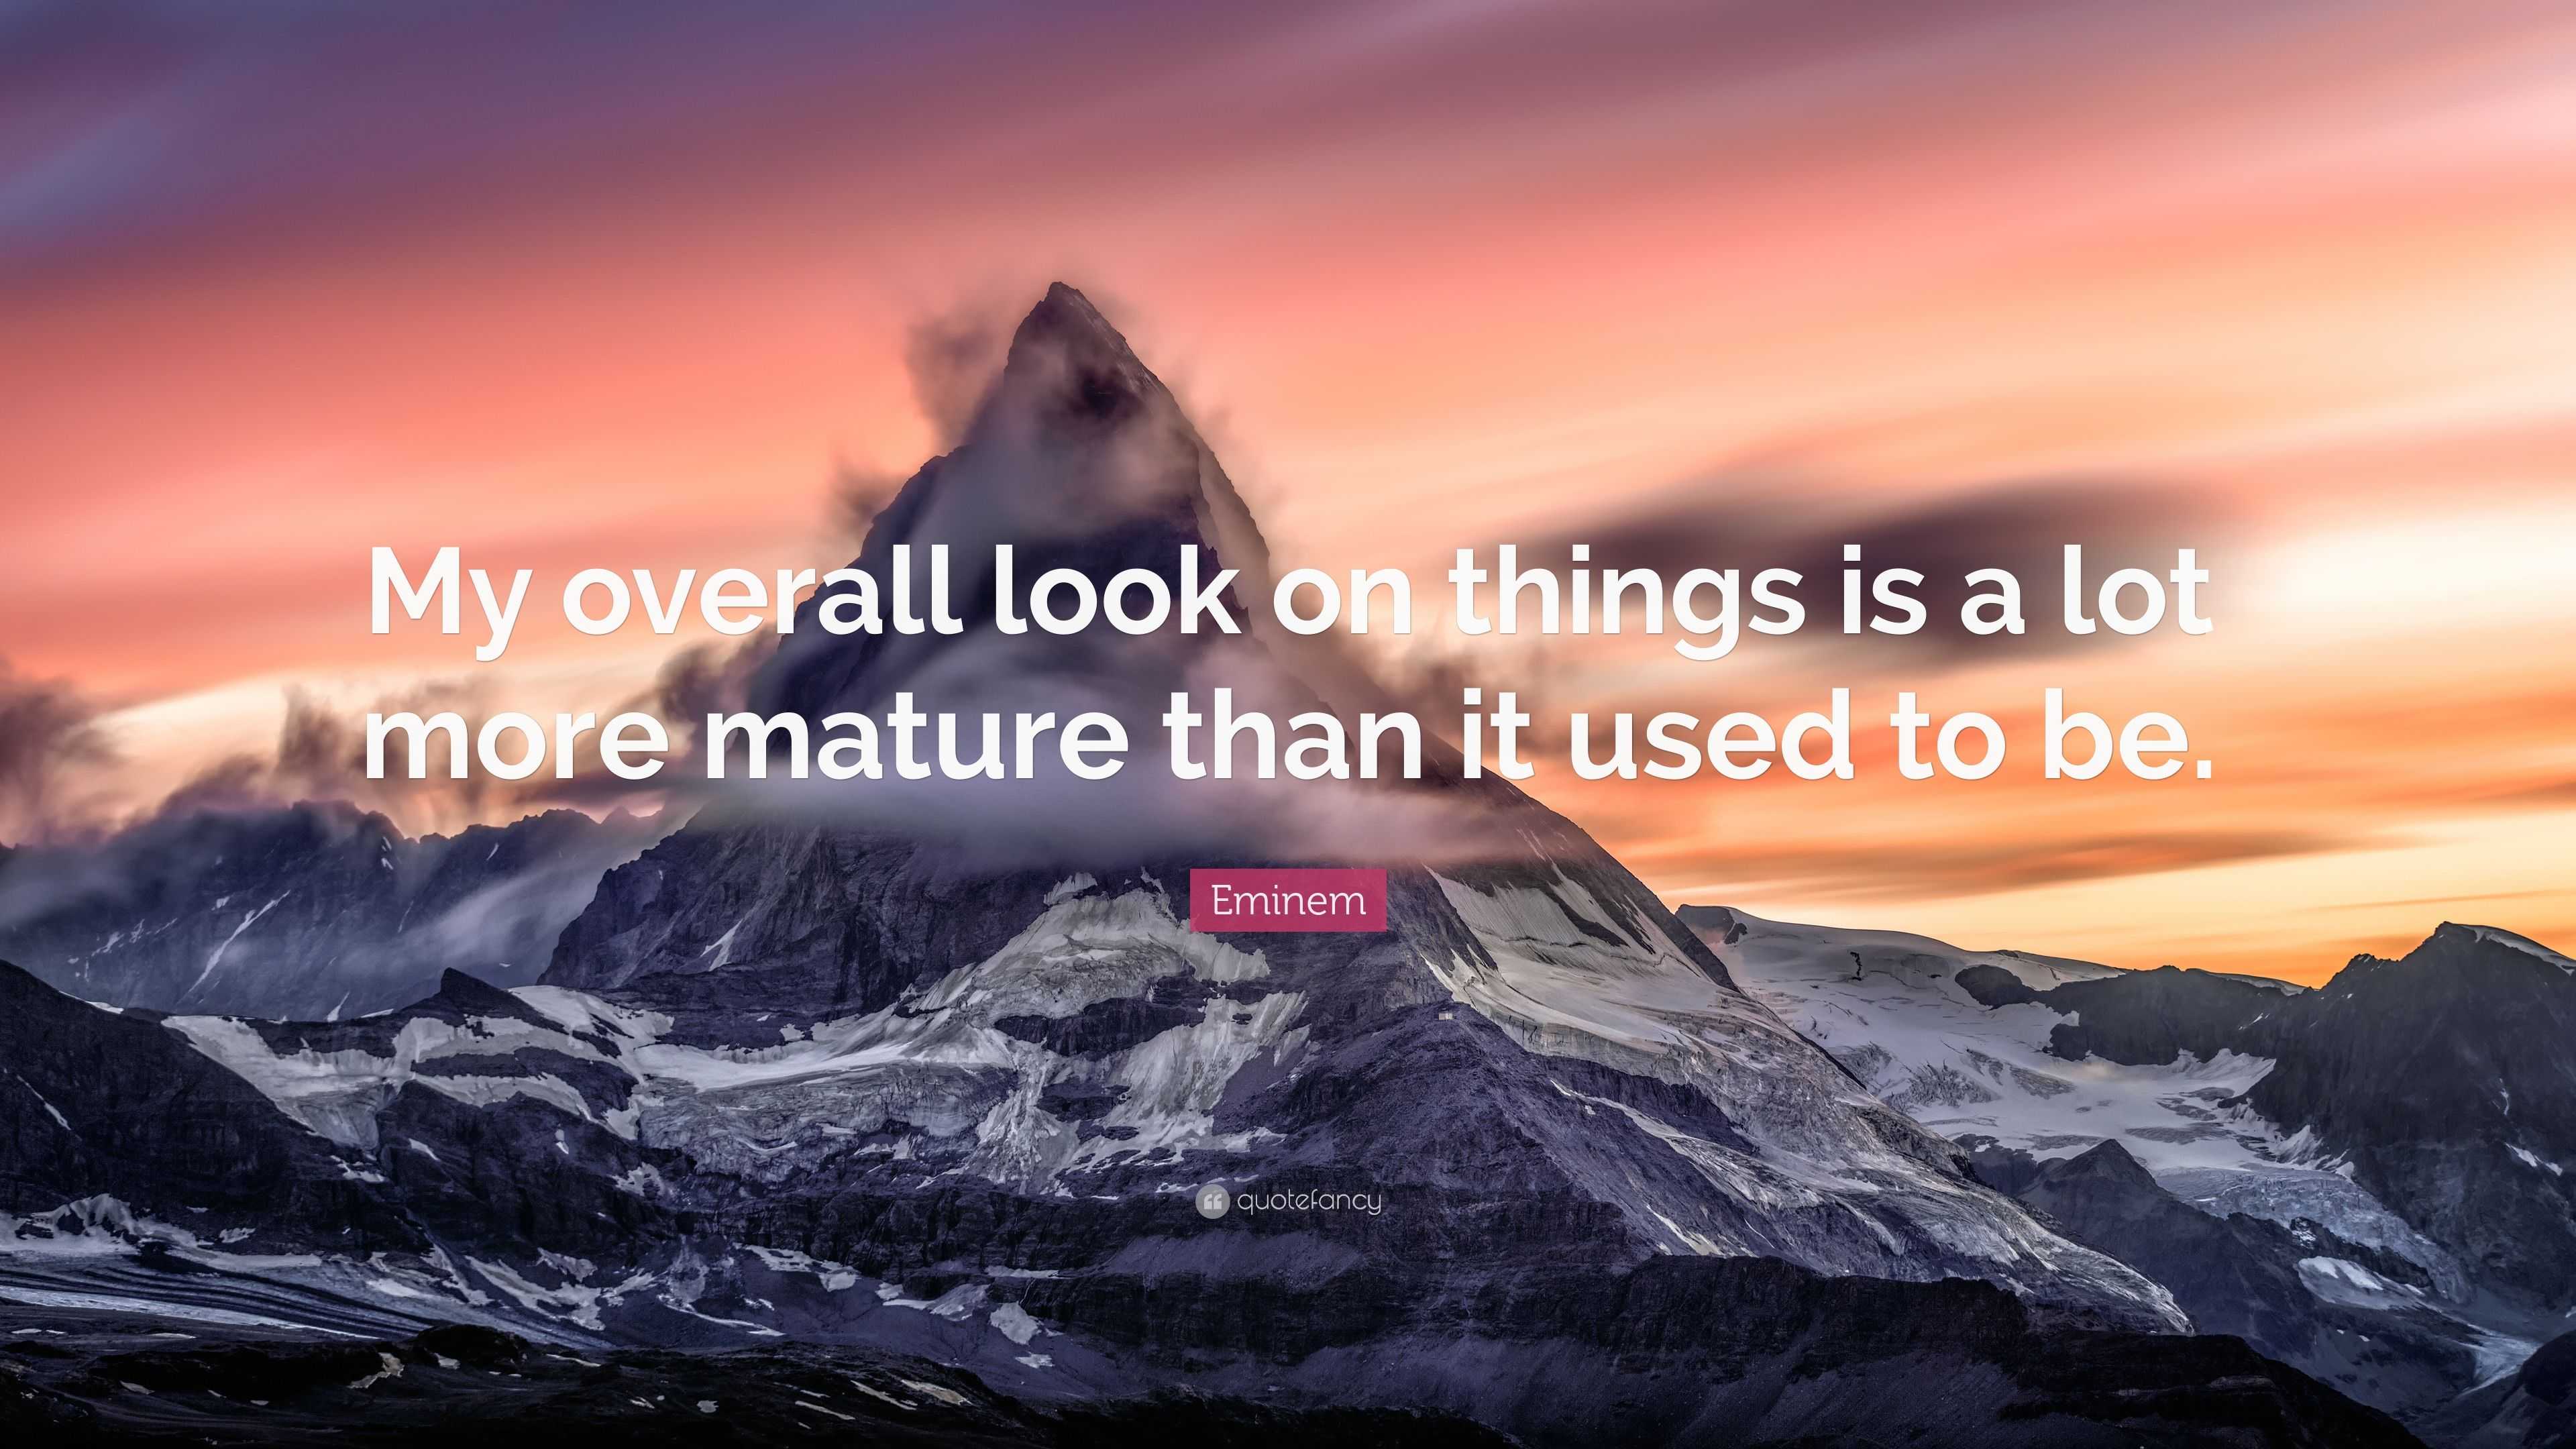 Eminem Quote: “My overall look on things is a lot more mature than it used  to